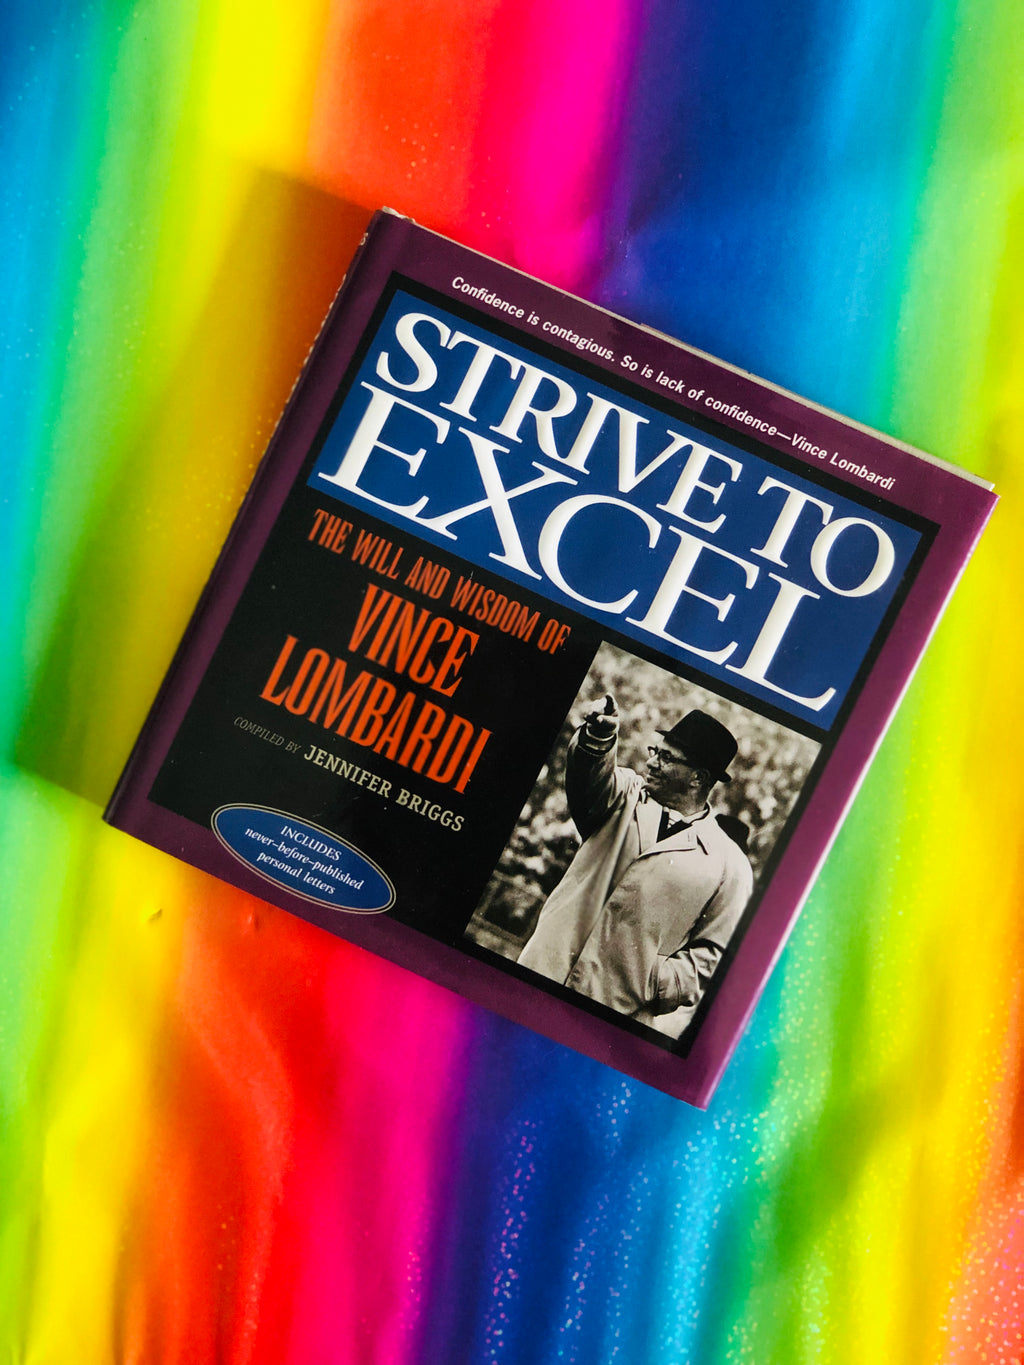 Strive to Excel: The Will and Wisdom of Vince Lombardi- Compiled By Jennifer Briggs